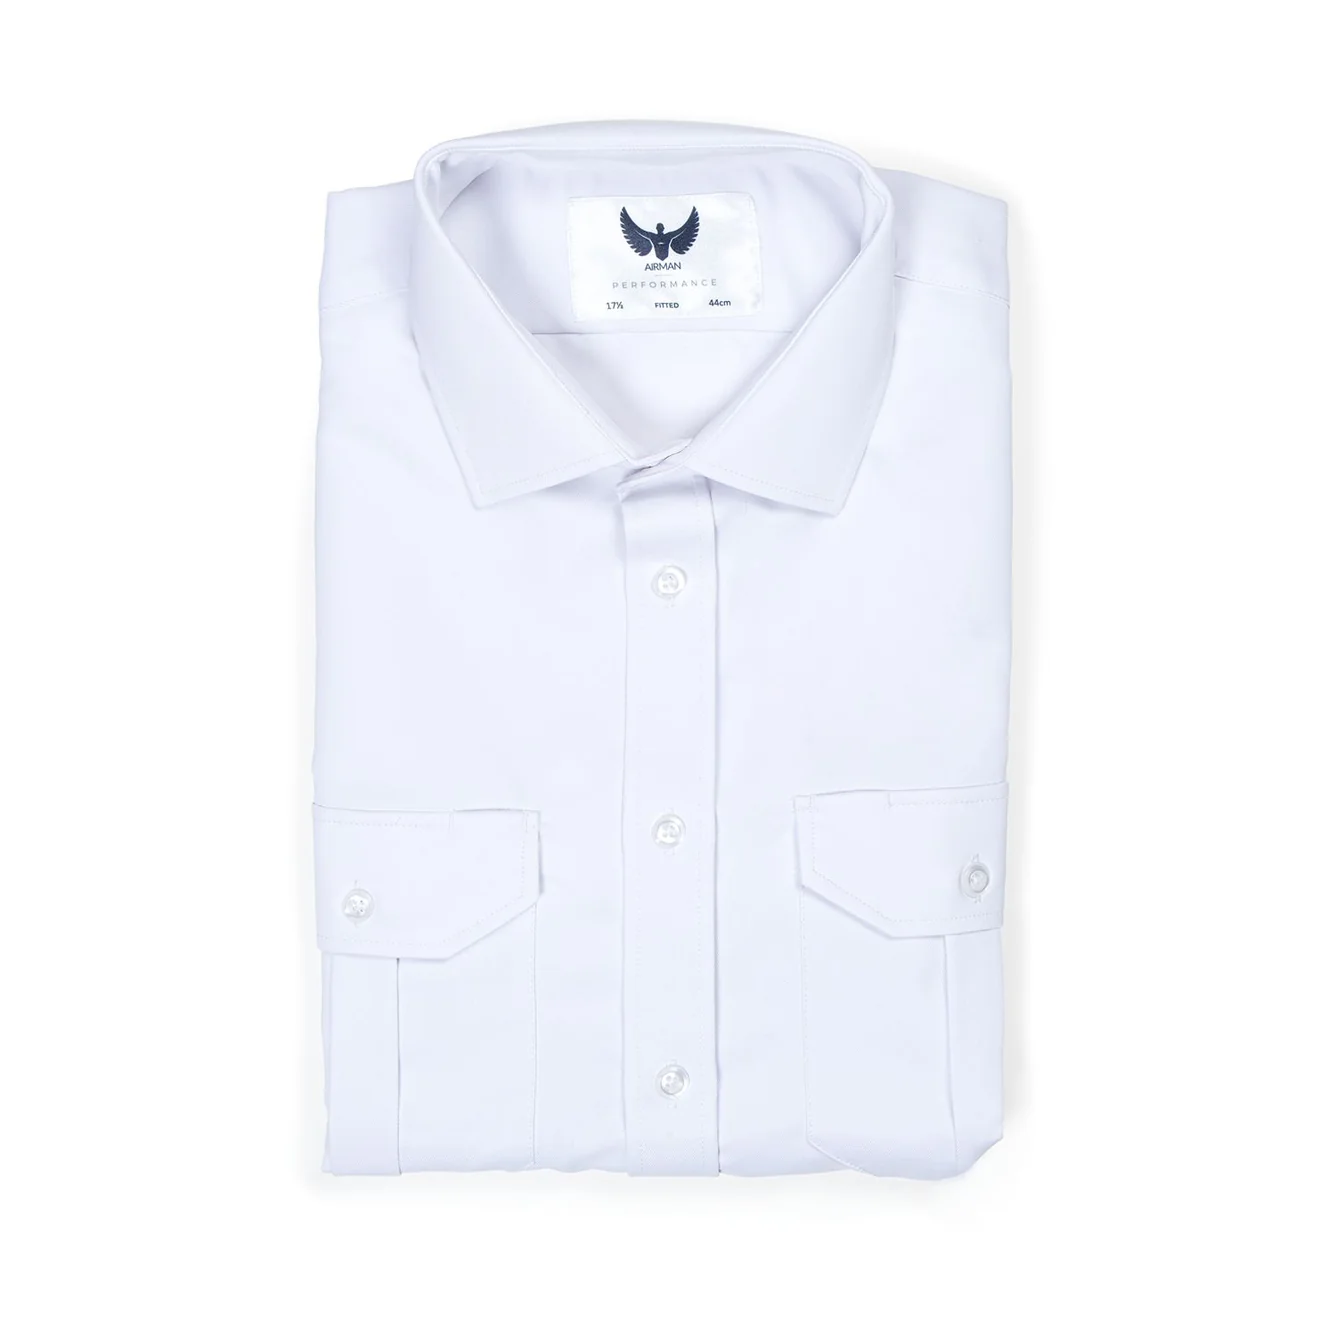 R SERIES - FITTED - Pilot Shirt